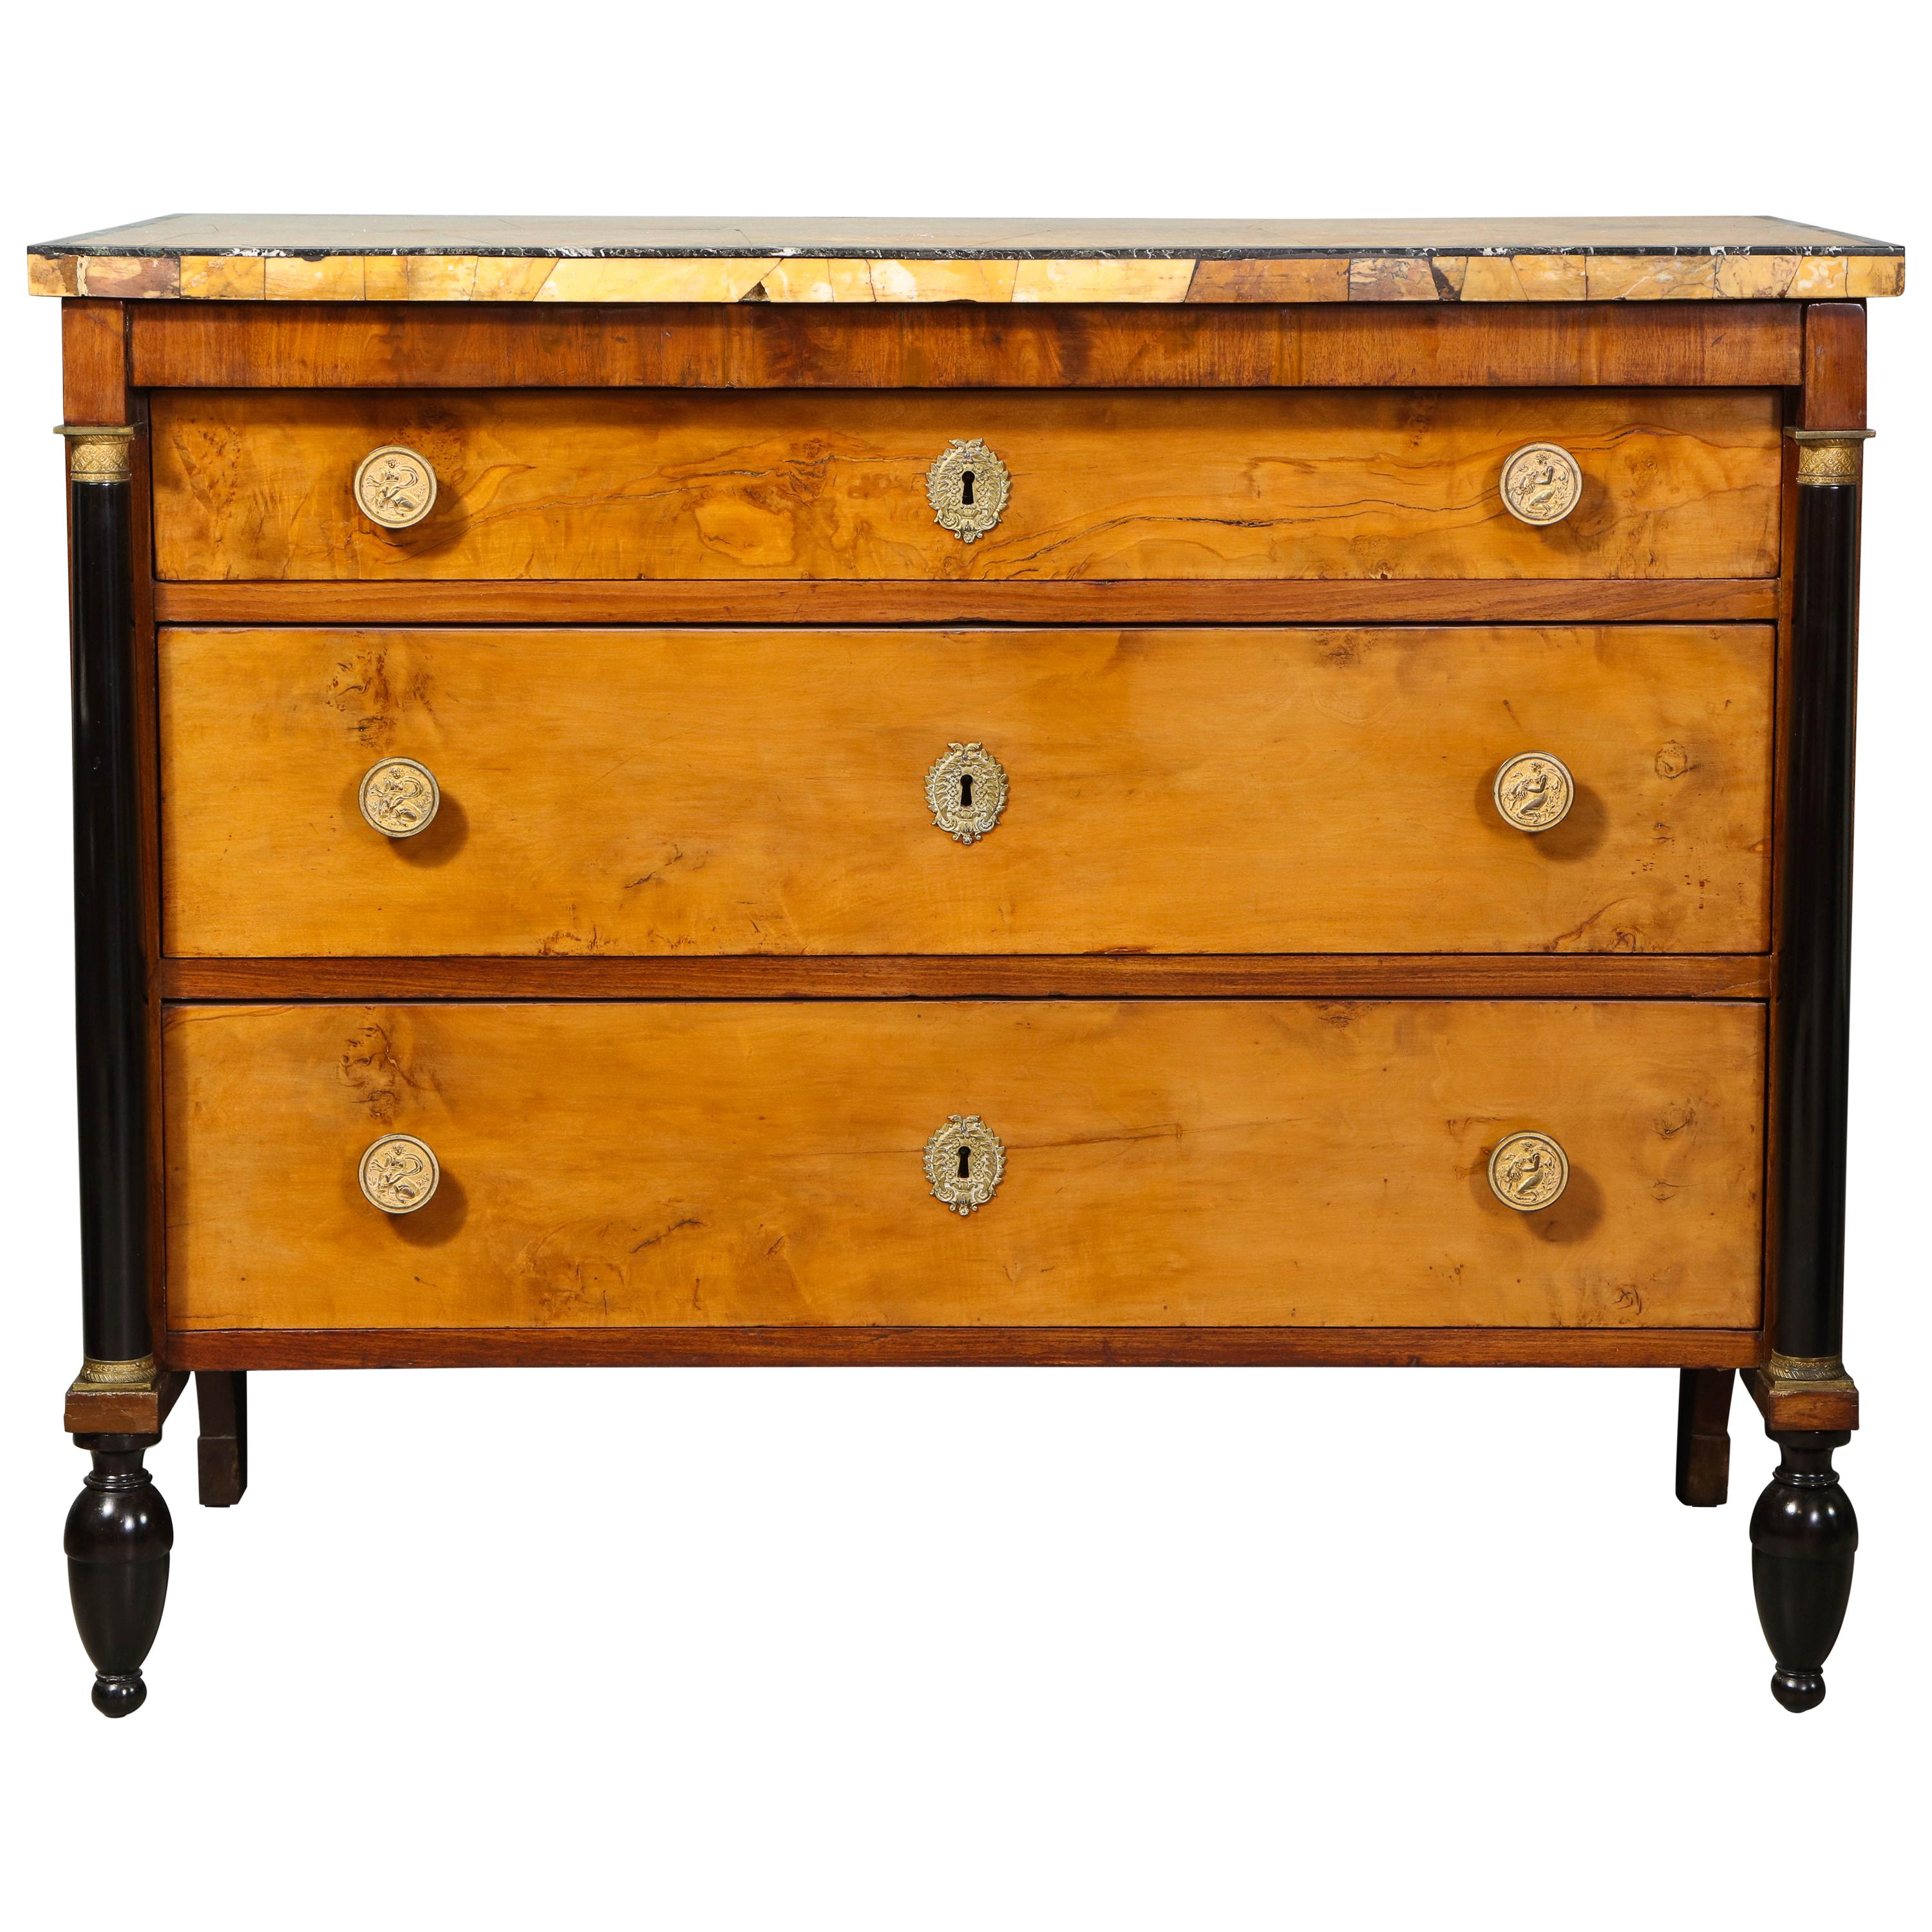 Northern Italian Neoclassic Sienna Marble-Topped Commode For Sale